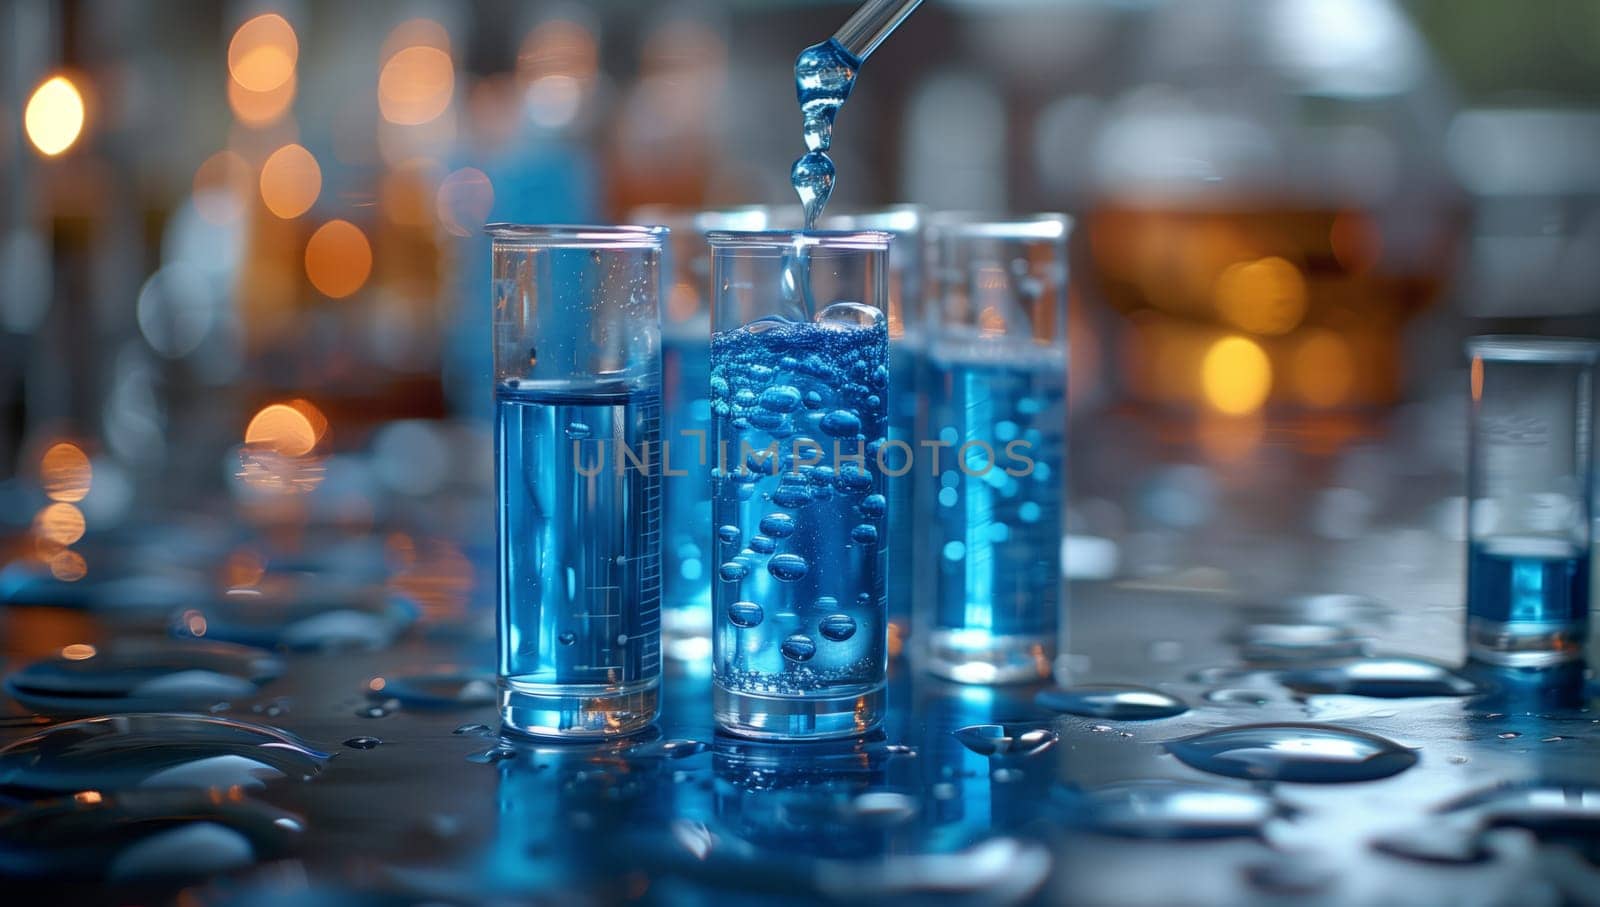 A pipette is transferring blue liquid into a glass by richwolf